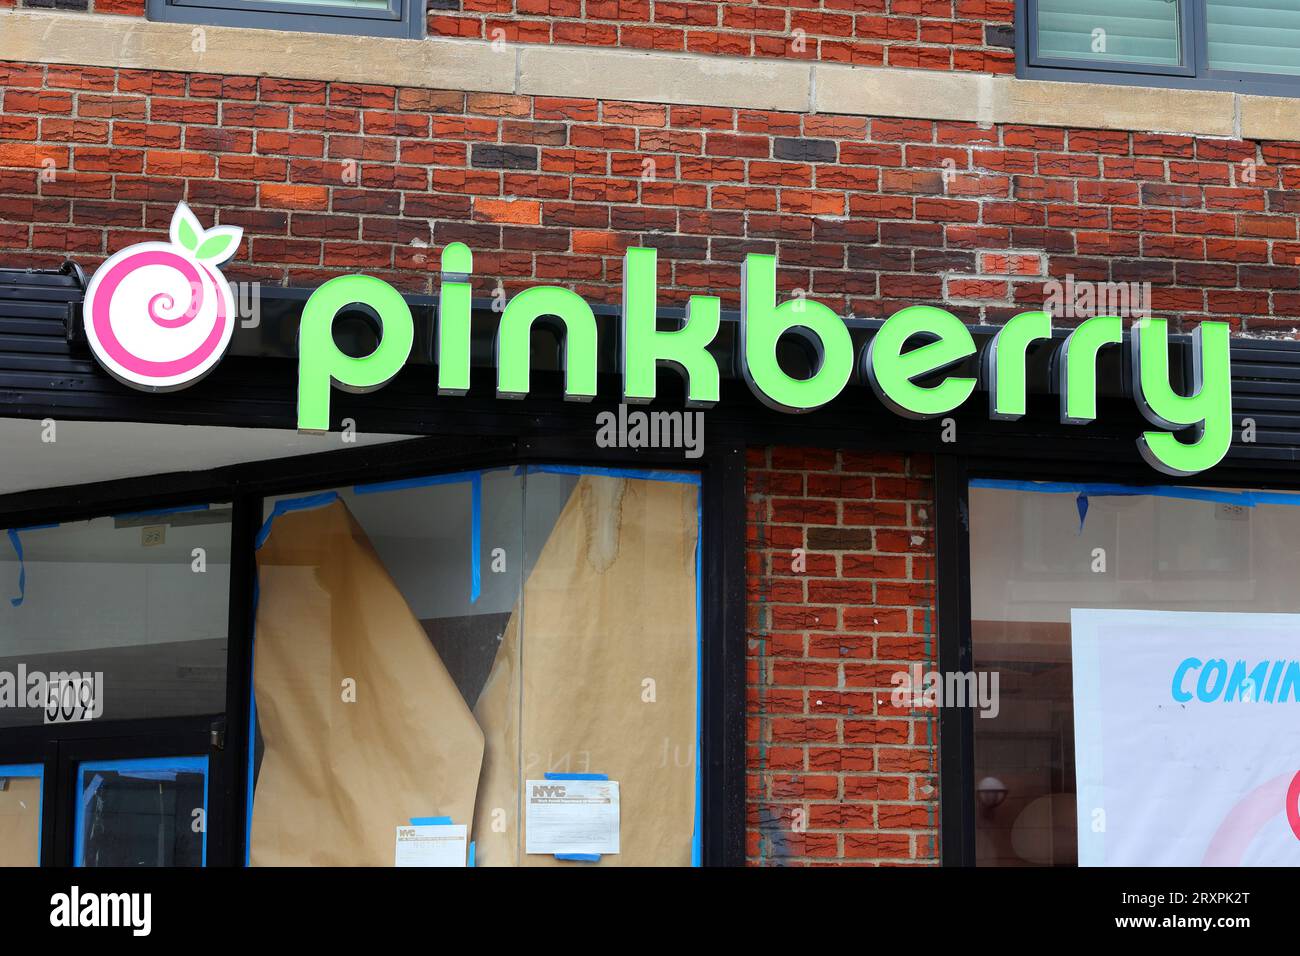 Signage for a Pinkberry frozen yogurt shop and franchise at a soon-to-open location in New York City. Stock Photo